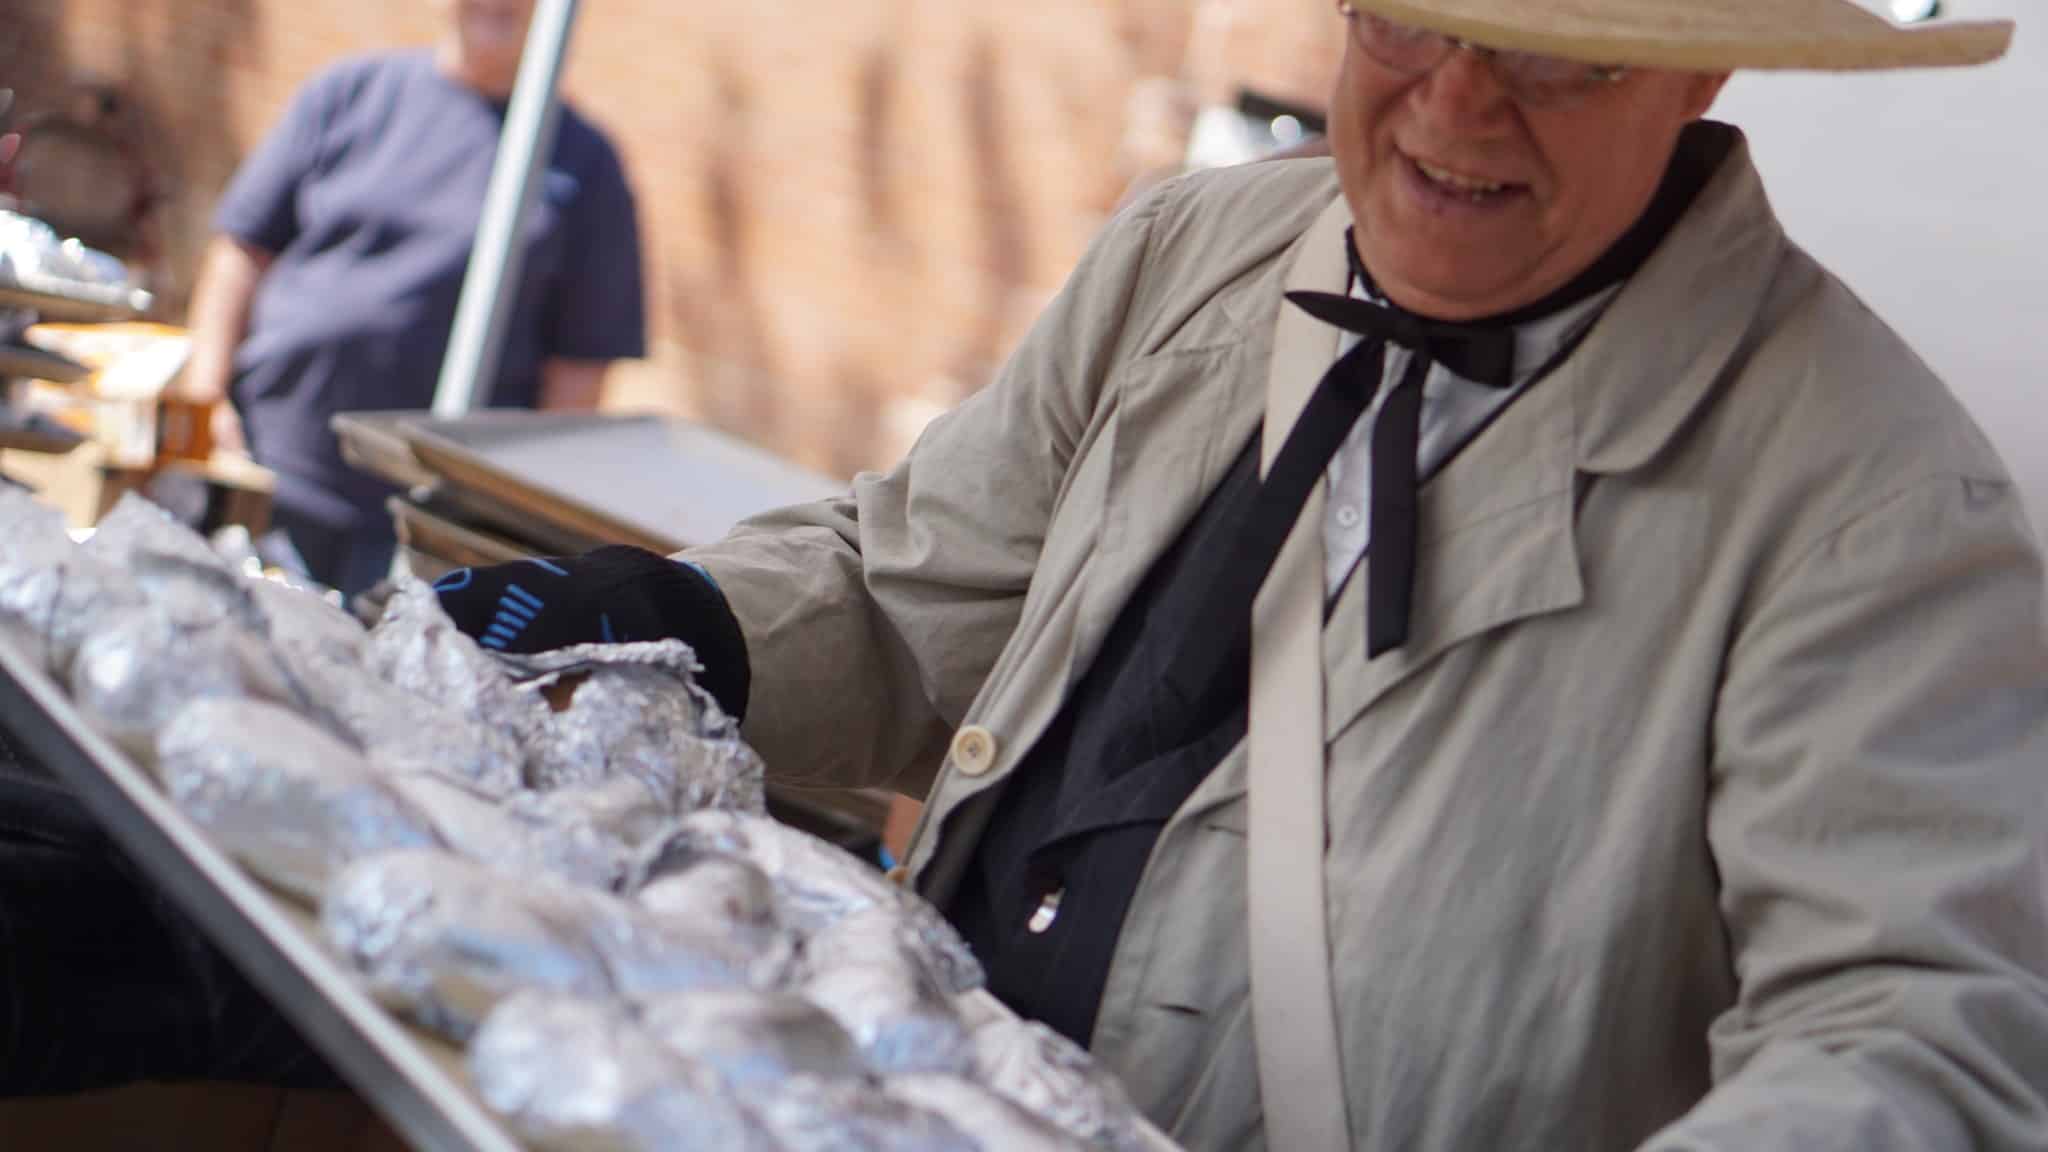 A man in a straw hat and homesteader costume lifts an extra large baking sheet covered in several dozen foil-wrapped baked potatoes